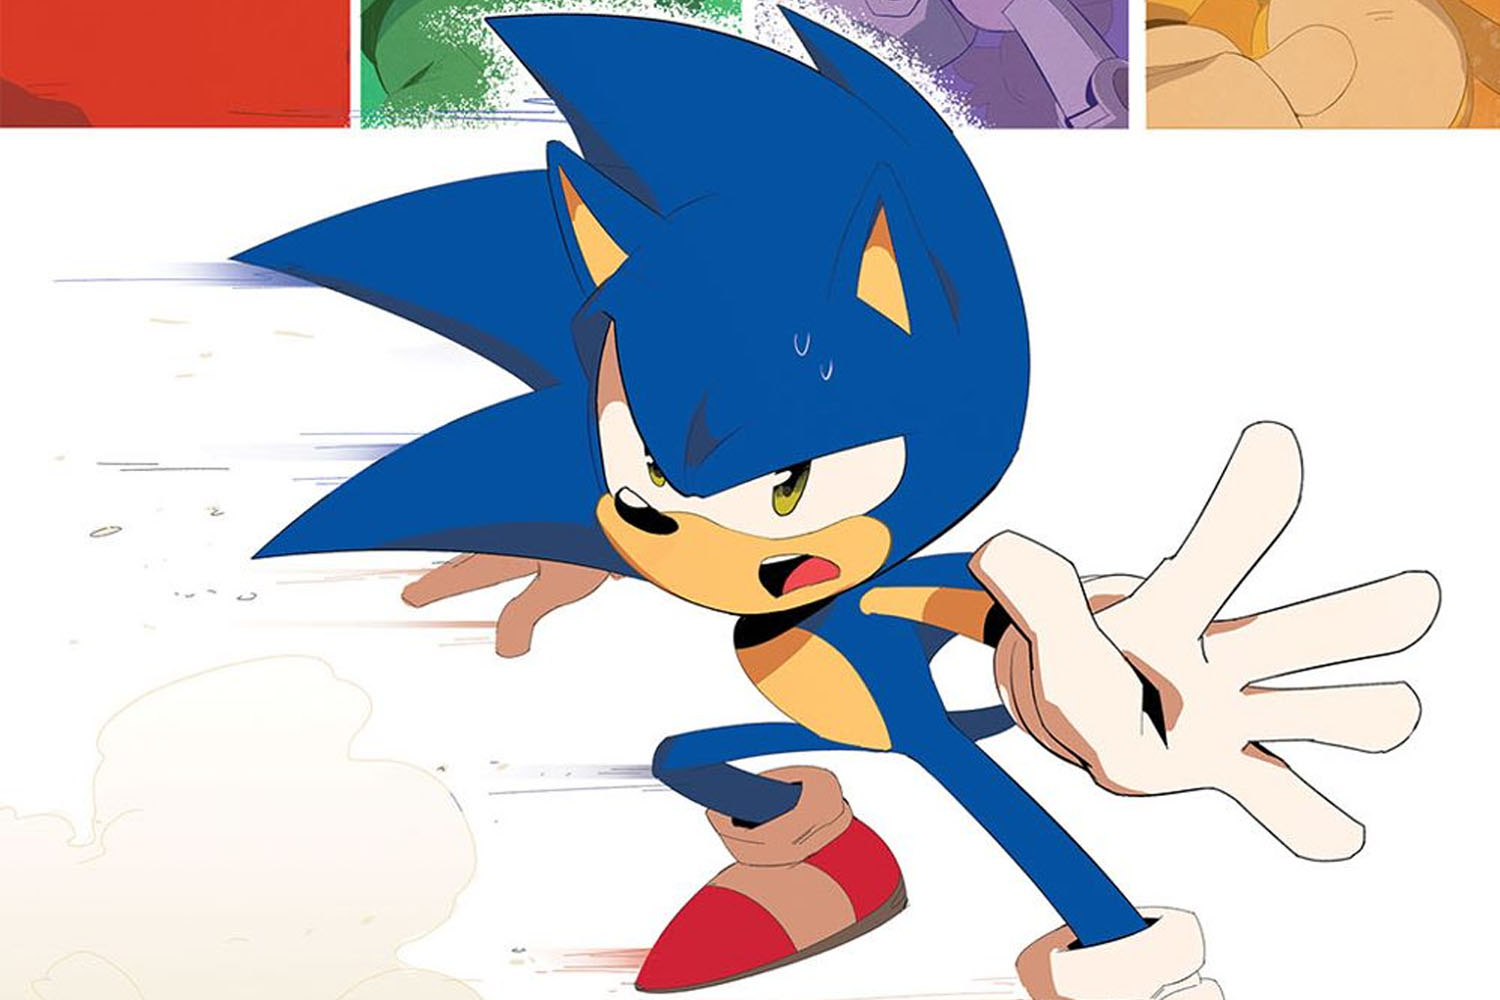 'Sonic The Hedgehog' #44 is sweet and sorrowful